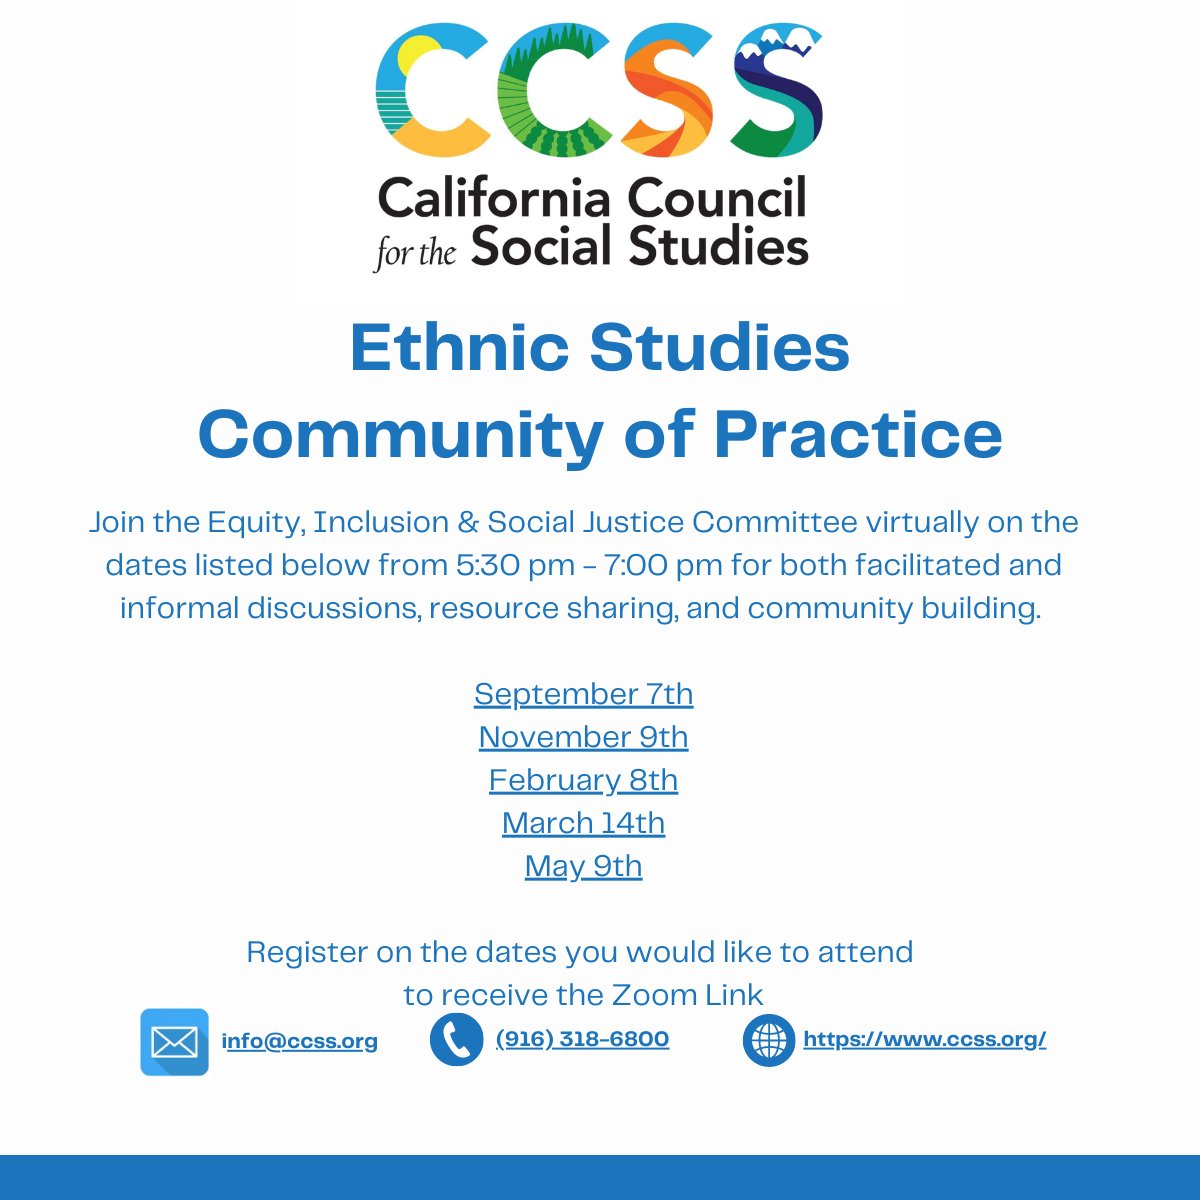 CCSS is excited to announce an opportunity to join our Ethnic Studies Community of Practice. We will host 5 virtual meetings during the  year where attendees will engage in discussion & community building. #sschat #caedchat #ethnicstudies Register at casocialstudies.org/event-5376498